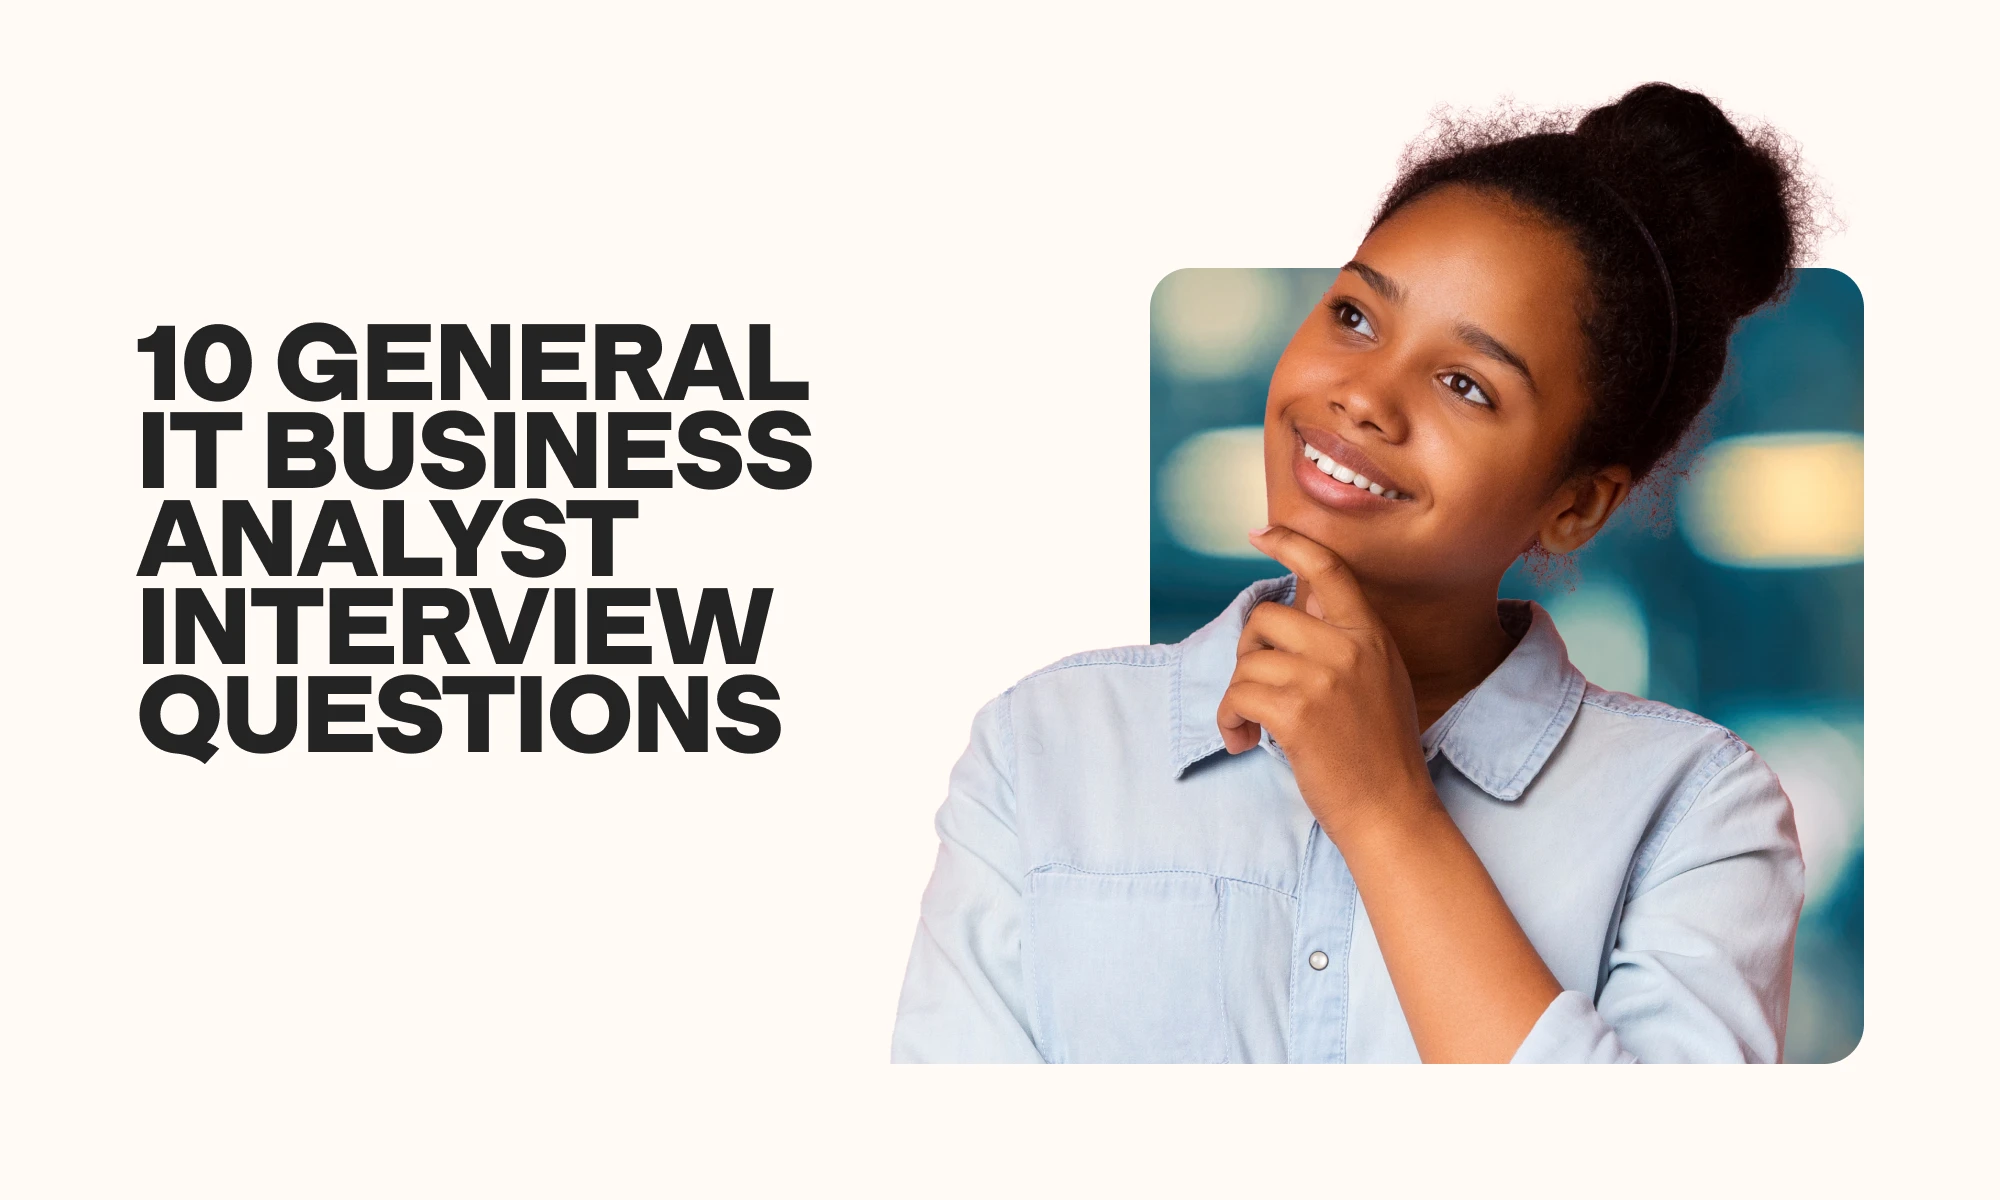 10 general IT business analyst interview questions